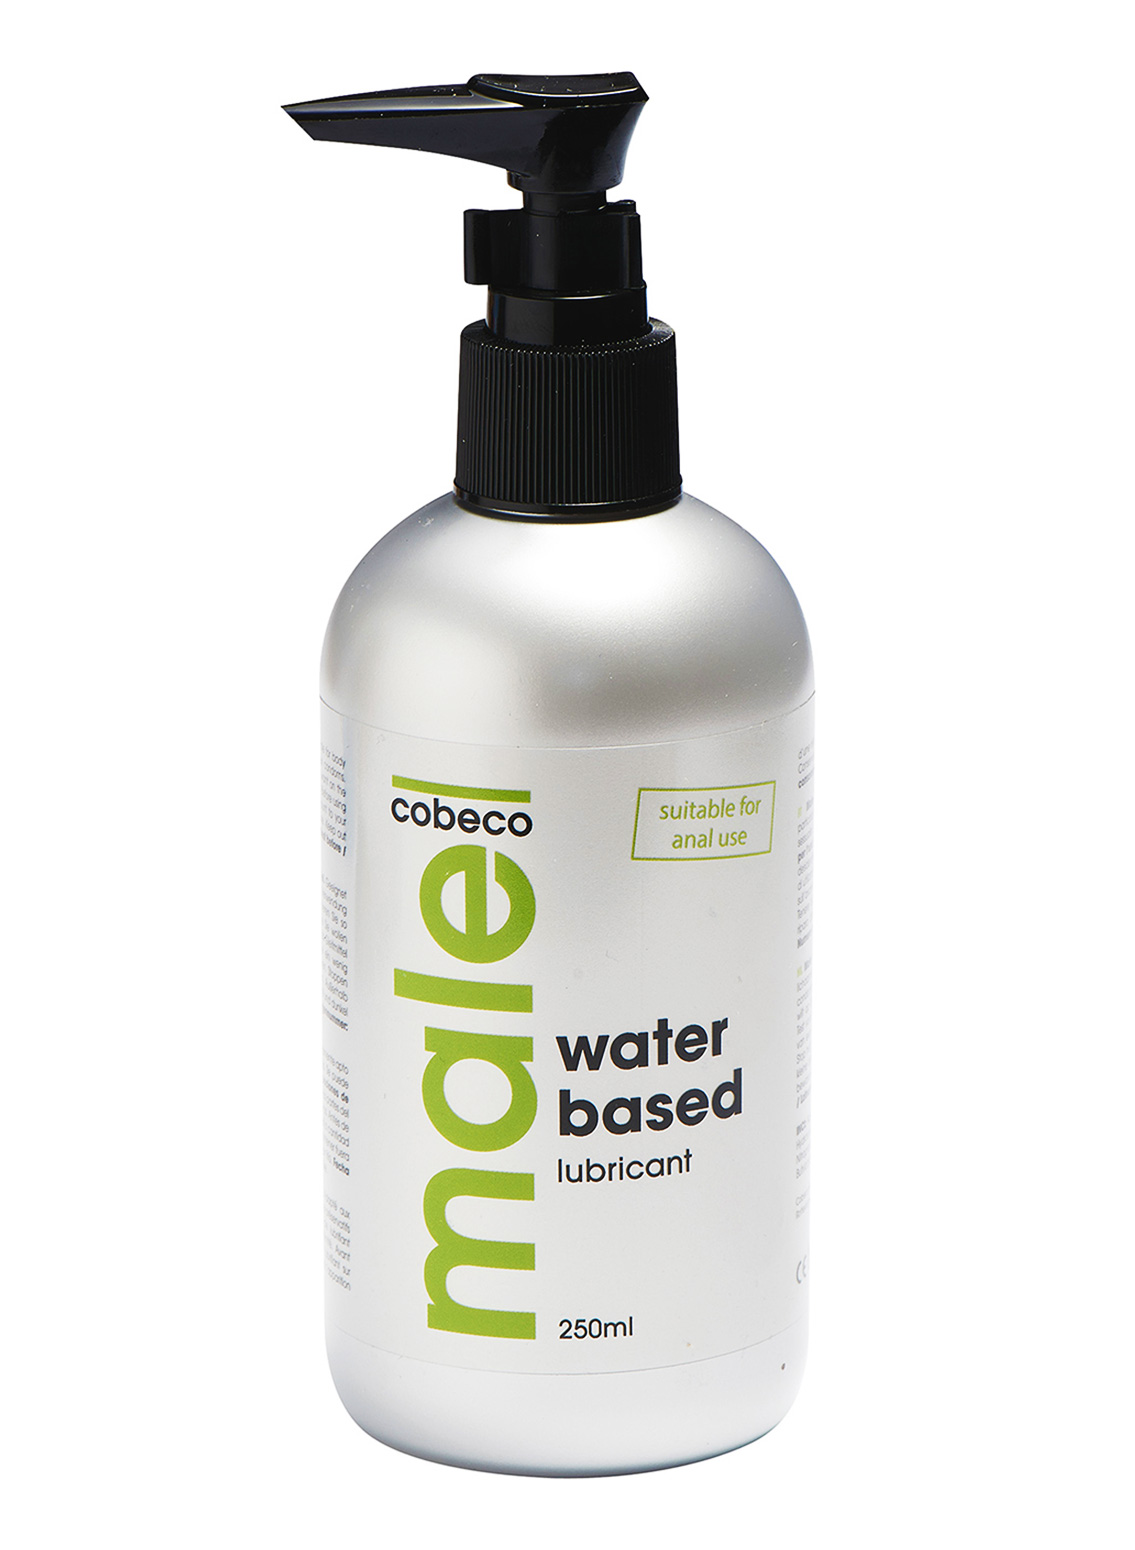 Cobeco Male Waterbased Lubricant